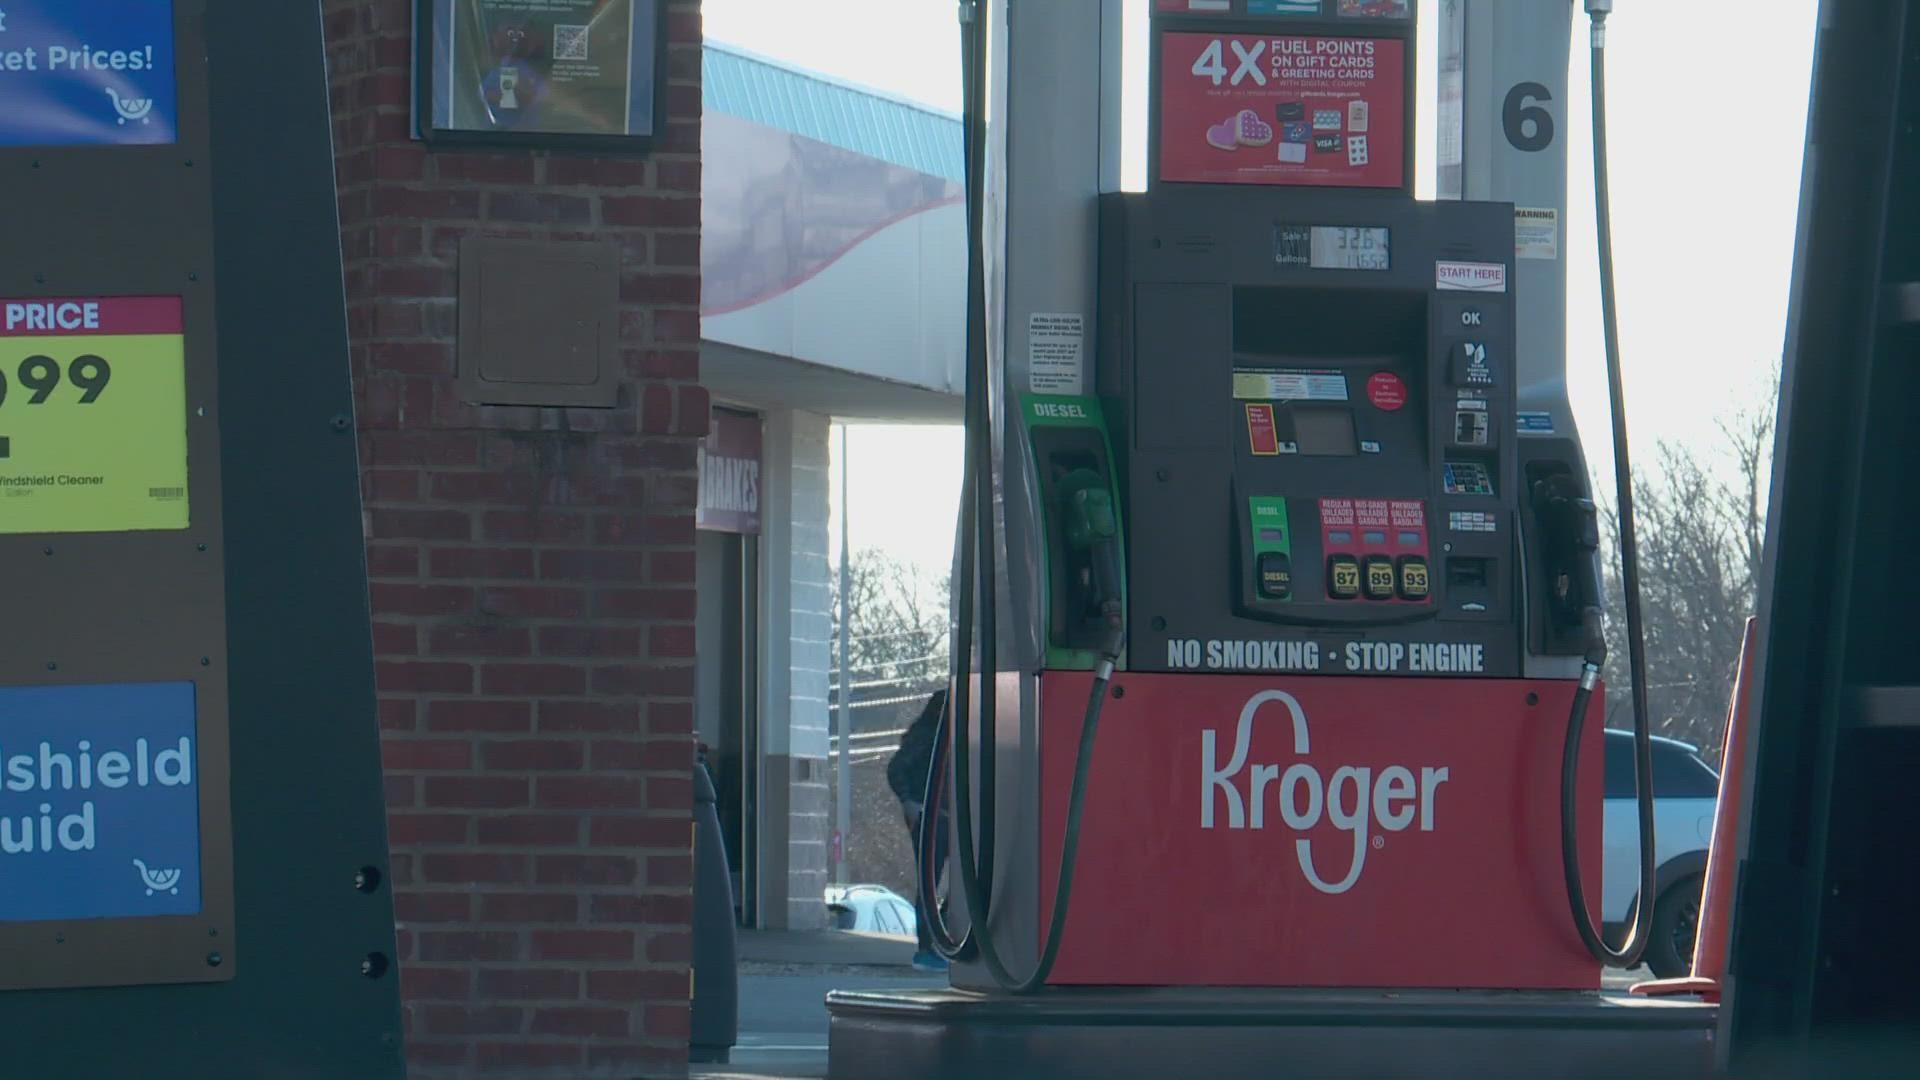 St. Matthews Police said three thefts happened in the last three weeks at the Kroger fuel station on Hubbards Lane and Westport Road.